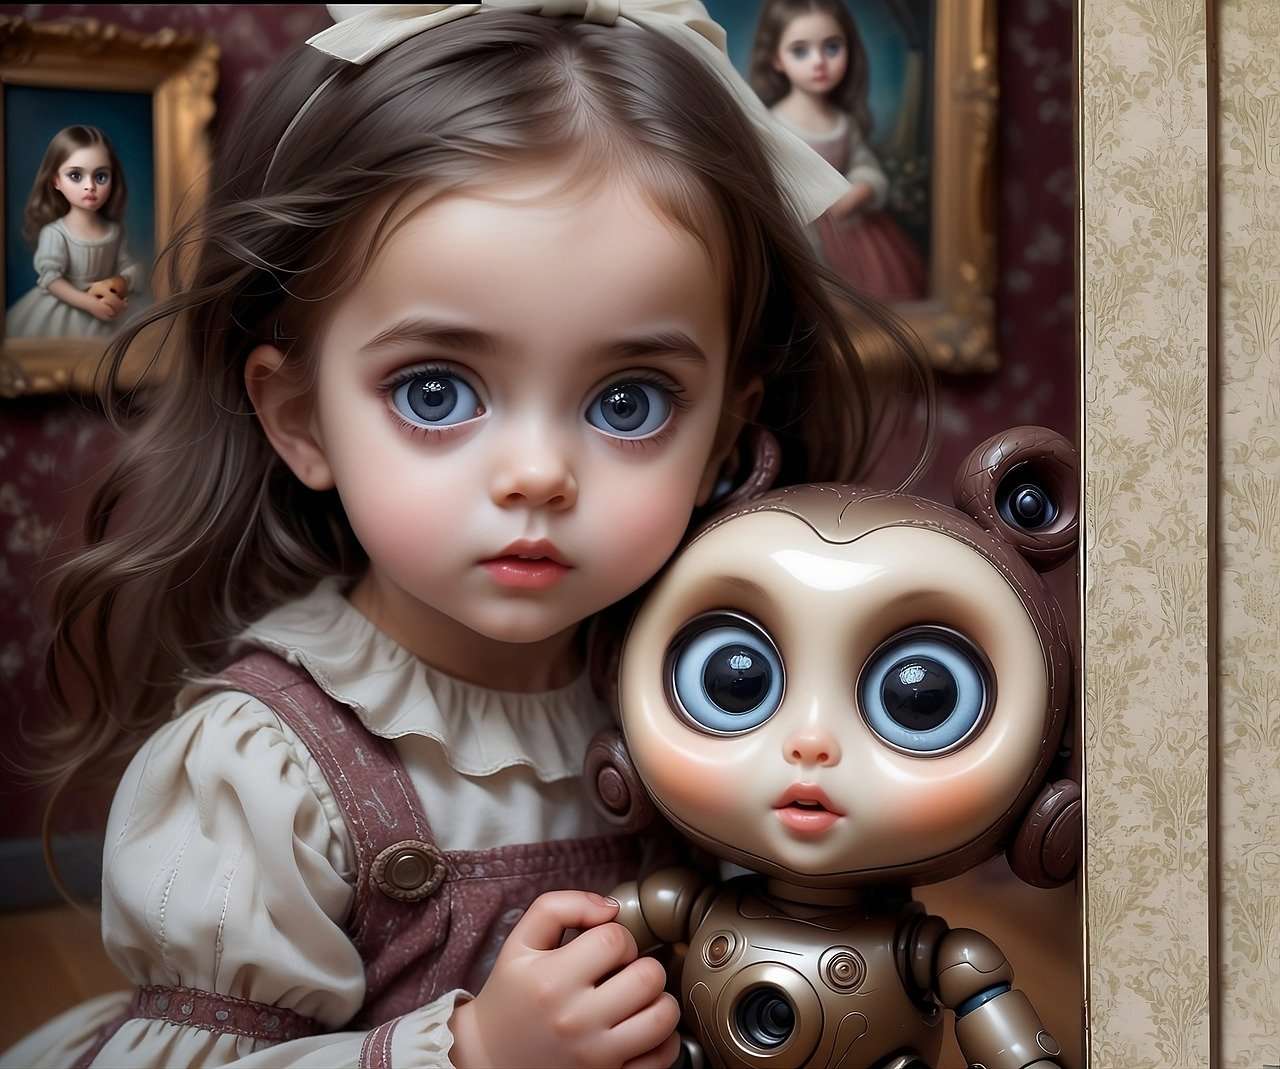 Girl with doll puzzle online from photo